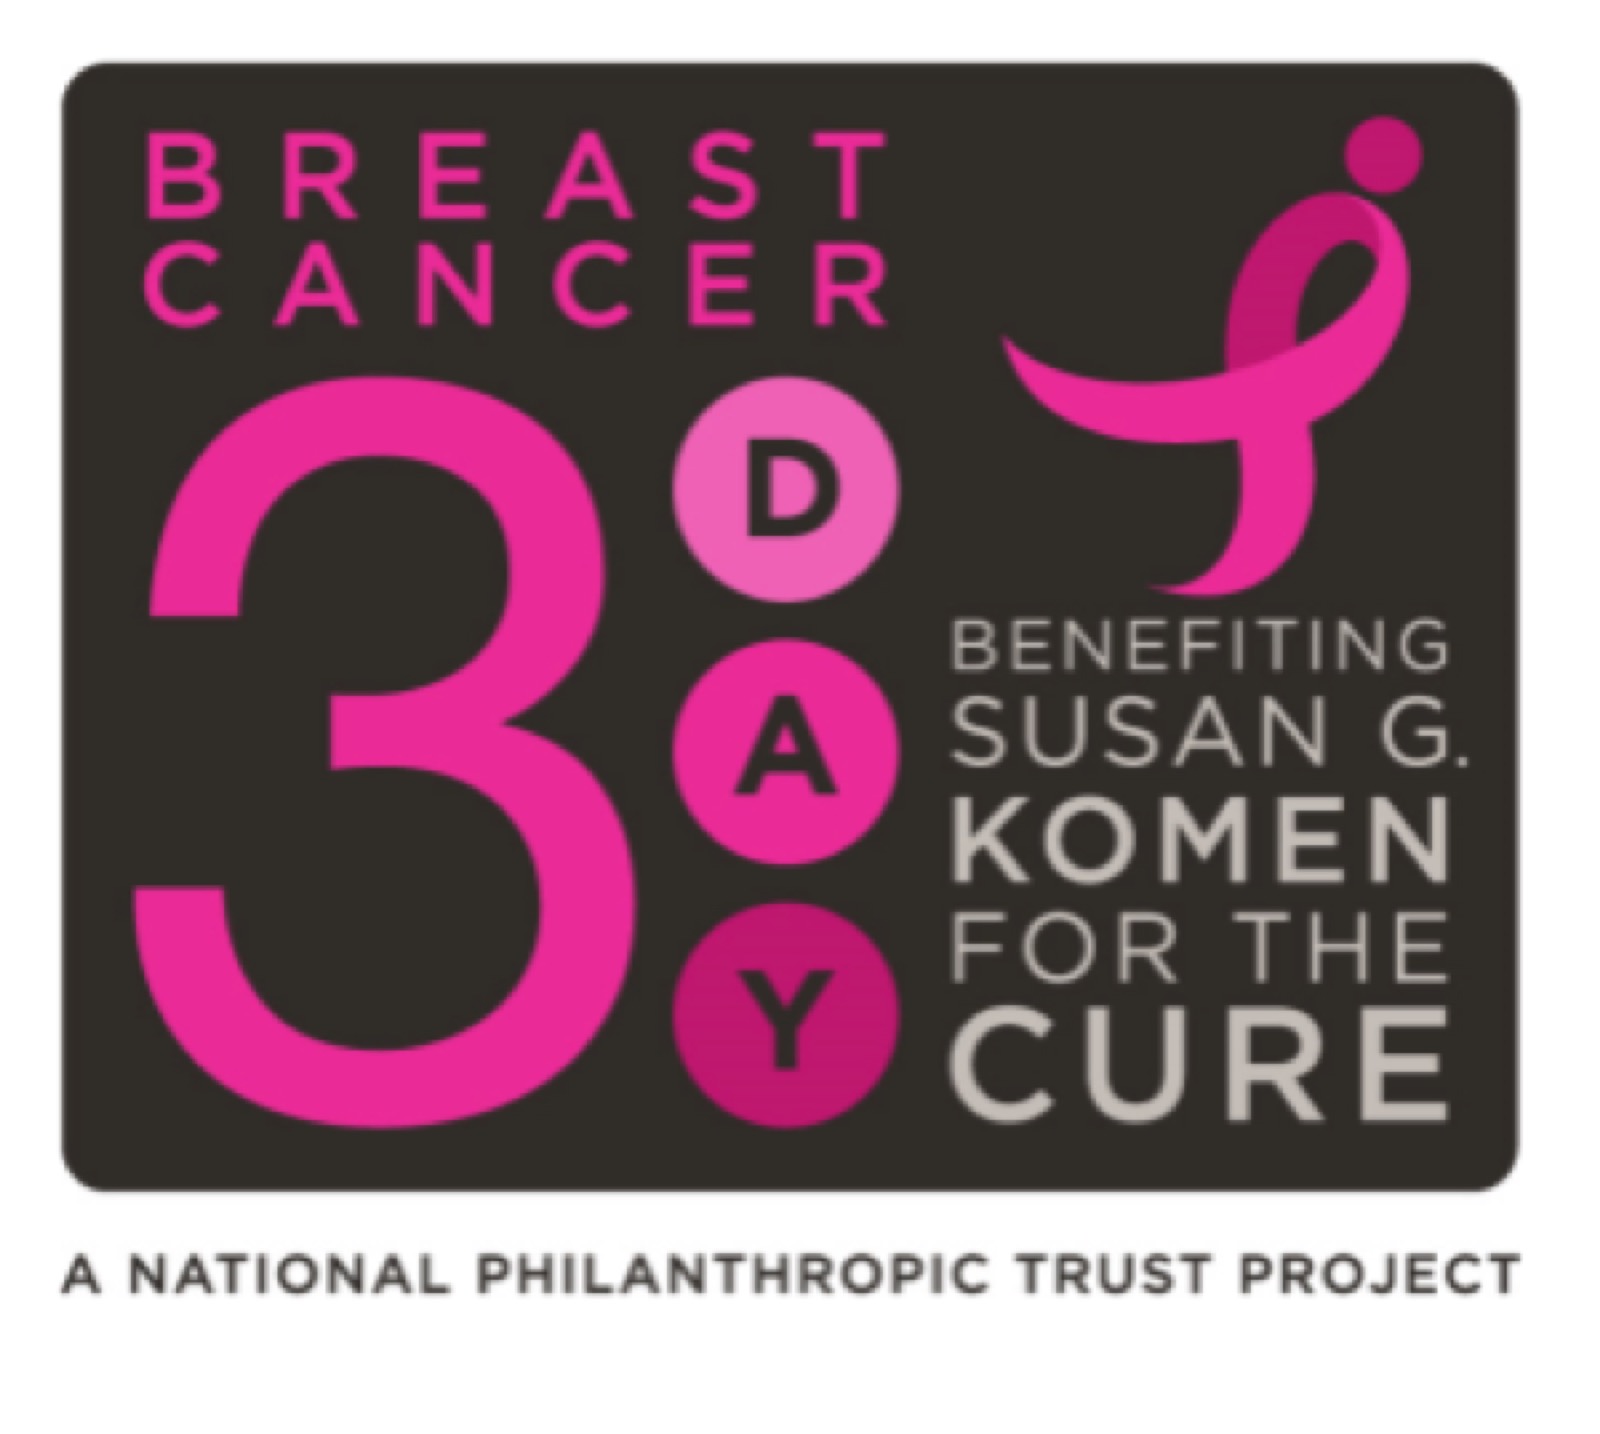 A logo advertising the NPT-sponsored Susan G. Komen 3-day event for the cure, featuring the Susan G. Komen Foundation logo in the corner.